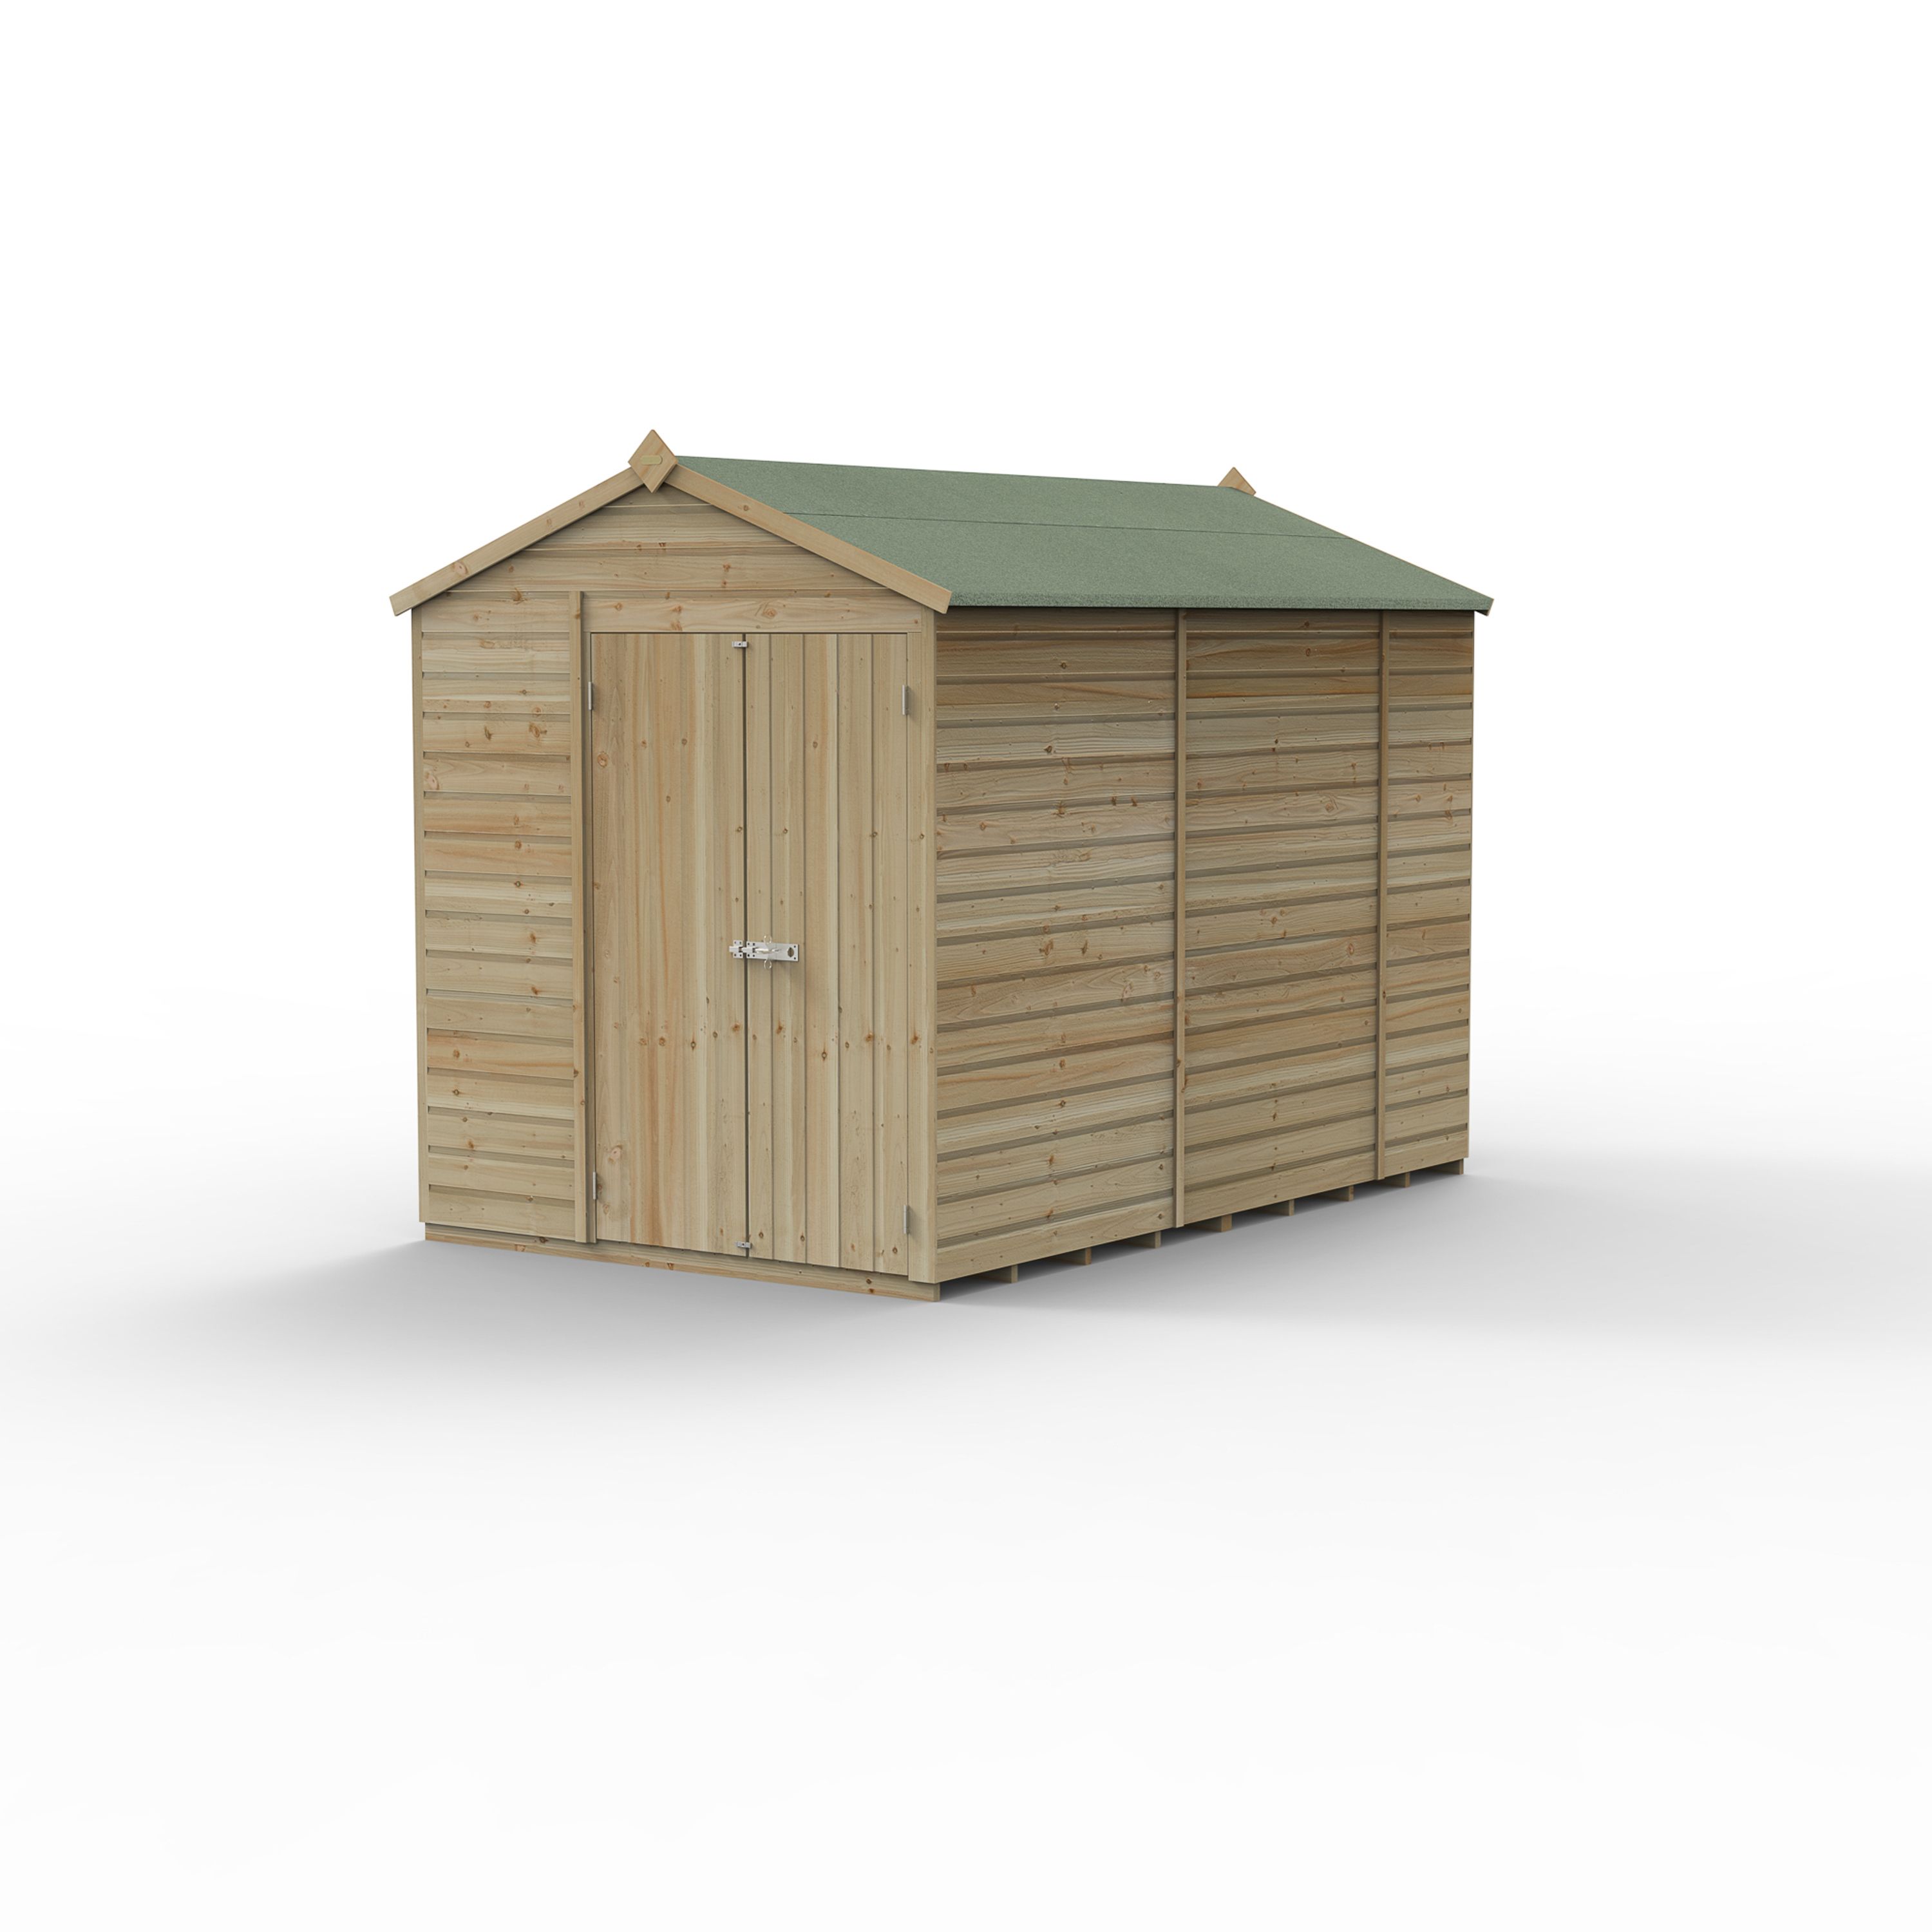 Forest Garden Beckwood 10x6 ft Apex Natural timber Wooden 2 door Shed with floor (Base included) - Assembly not required